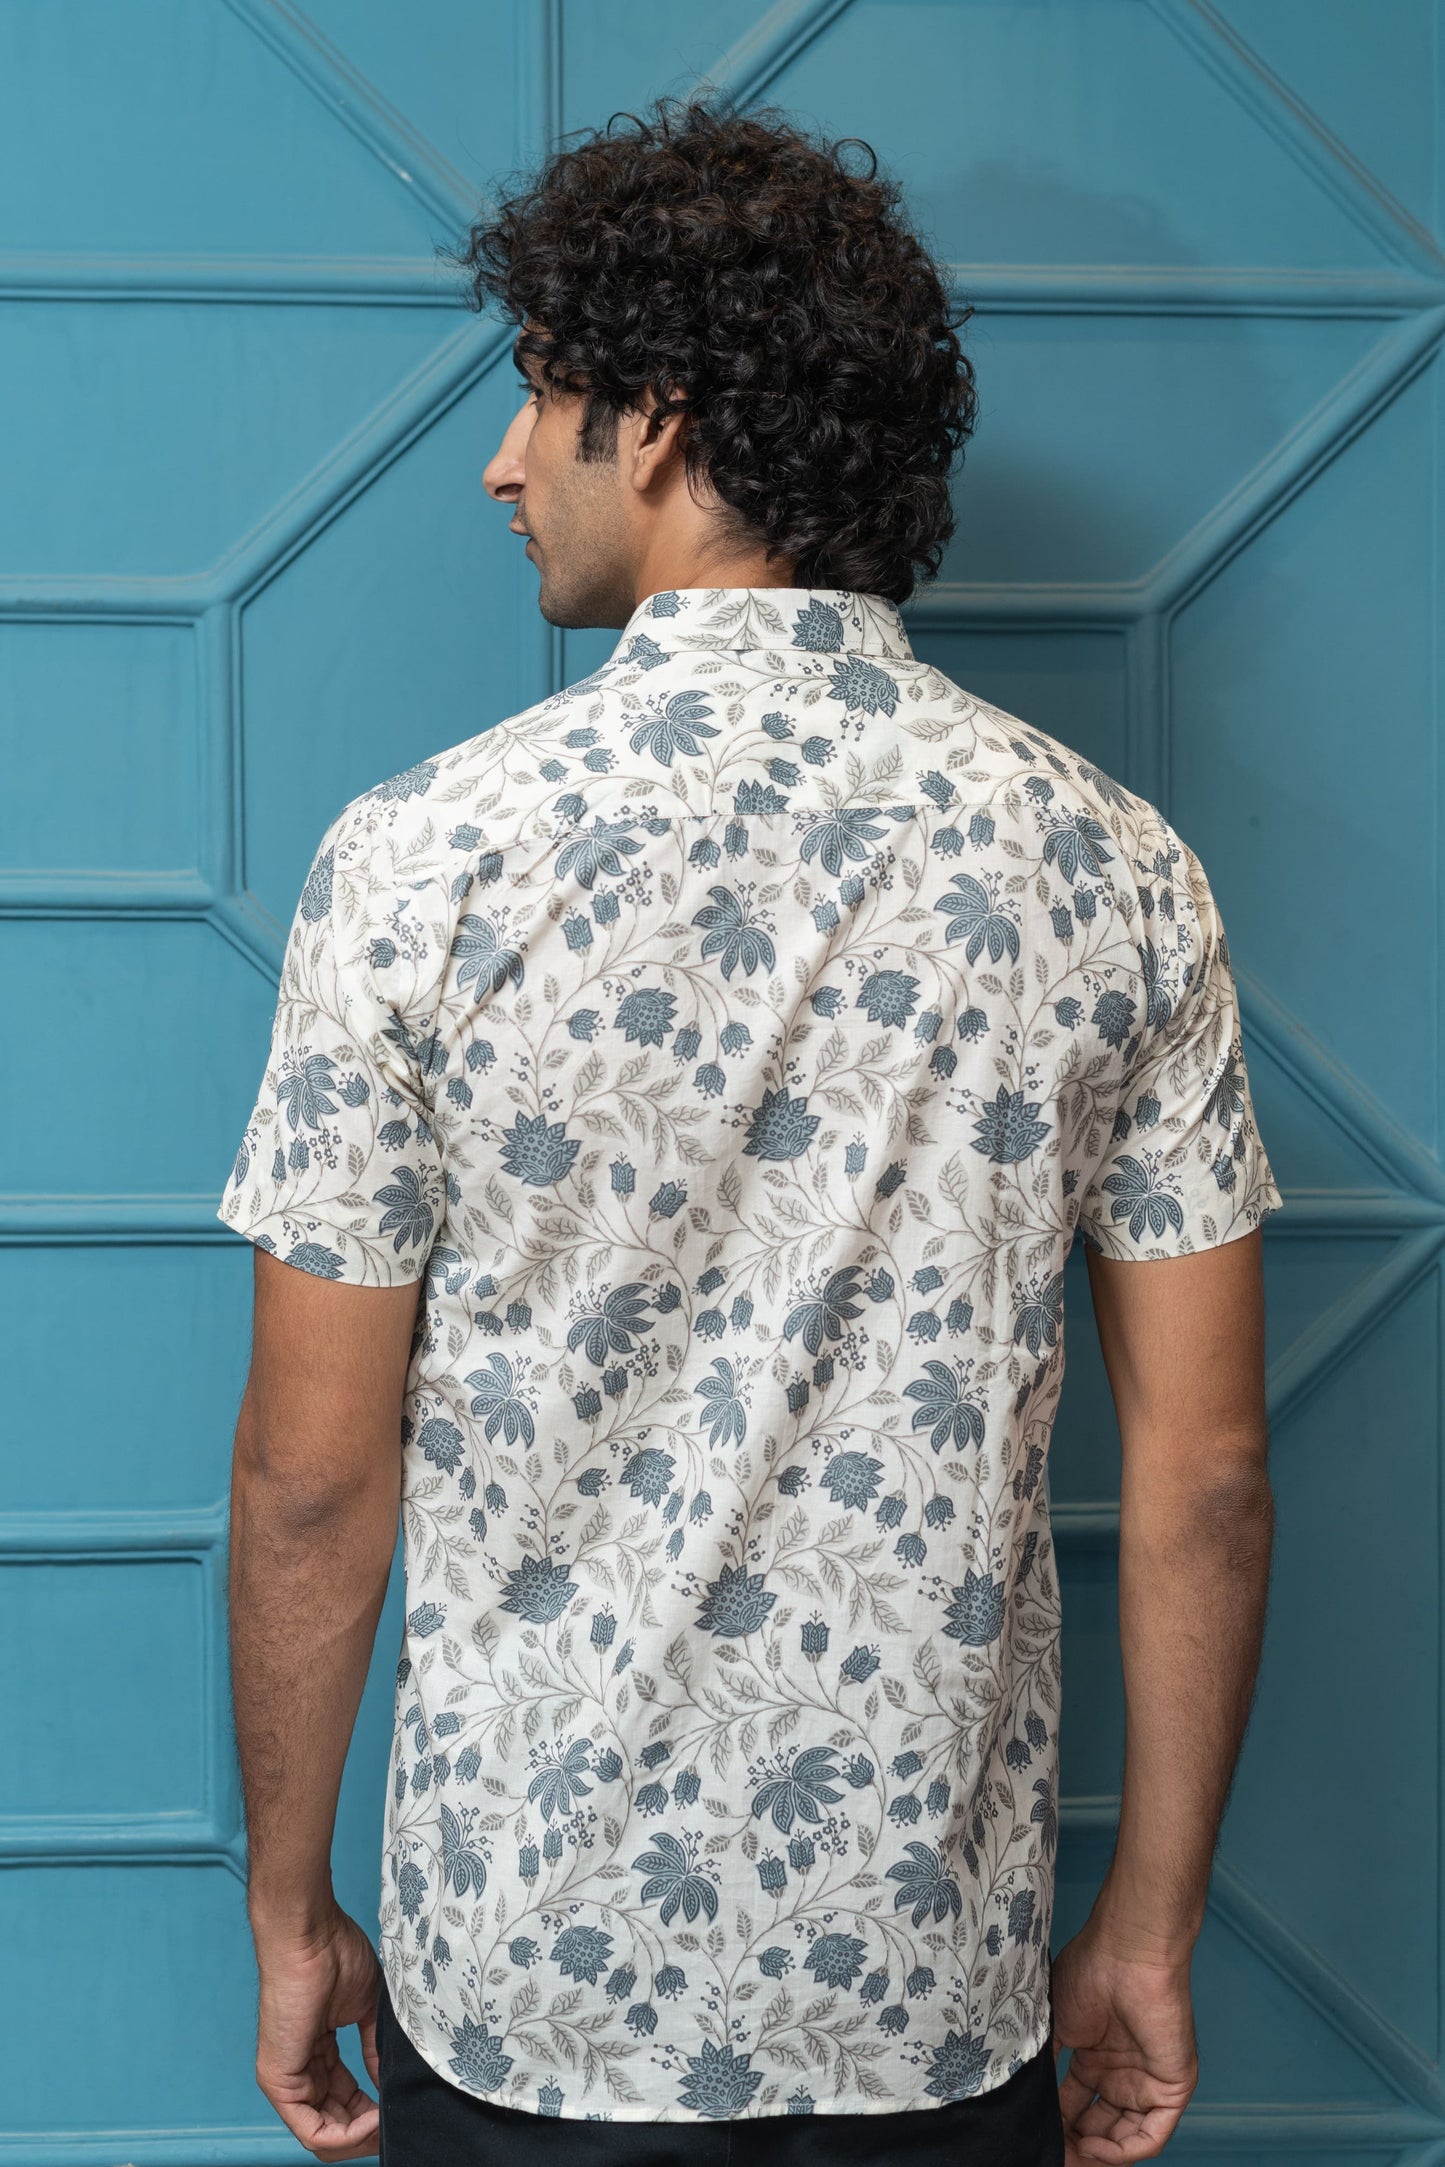 The White Half Sleeves Shirt With All-Over Floral Print